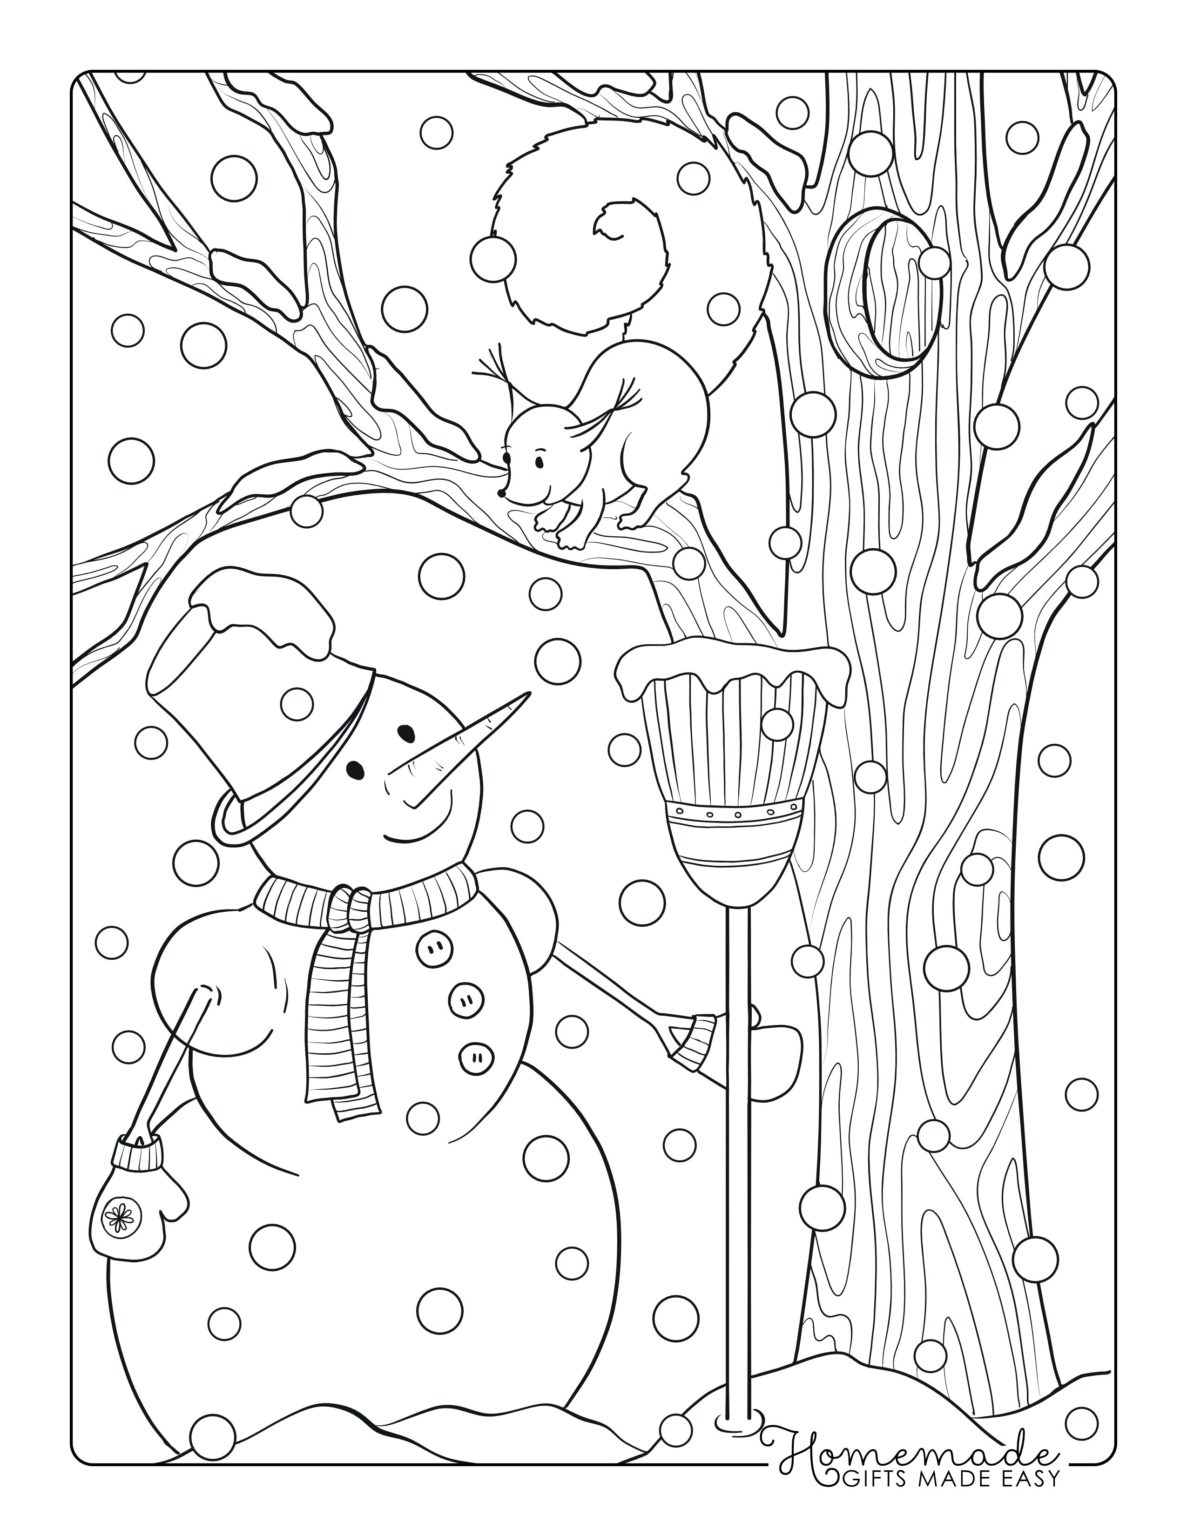 25 Printable Snowman Coloring Pages Anyone Can Enjoy - Happier Human